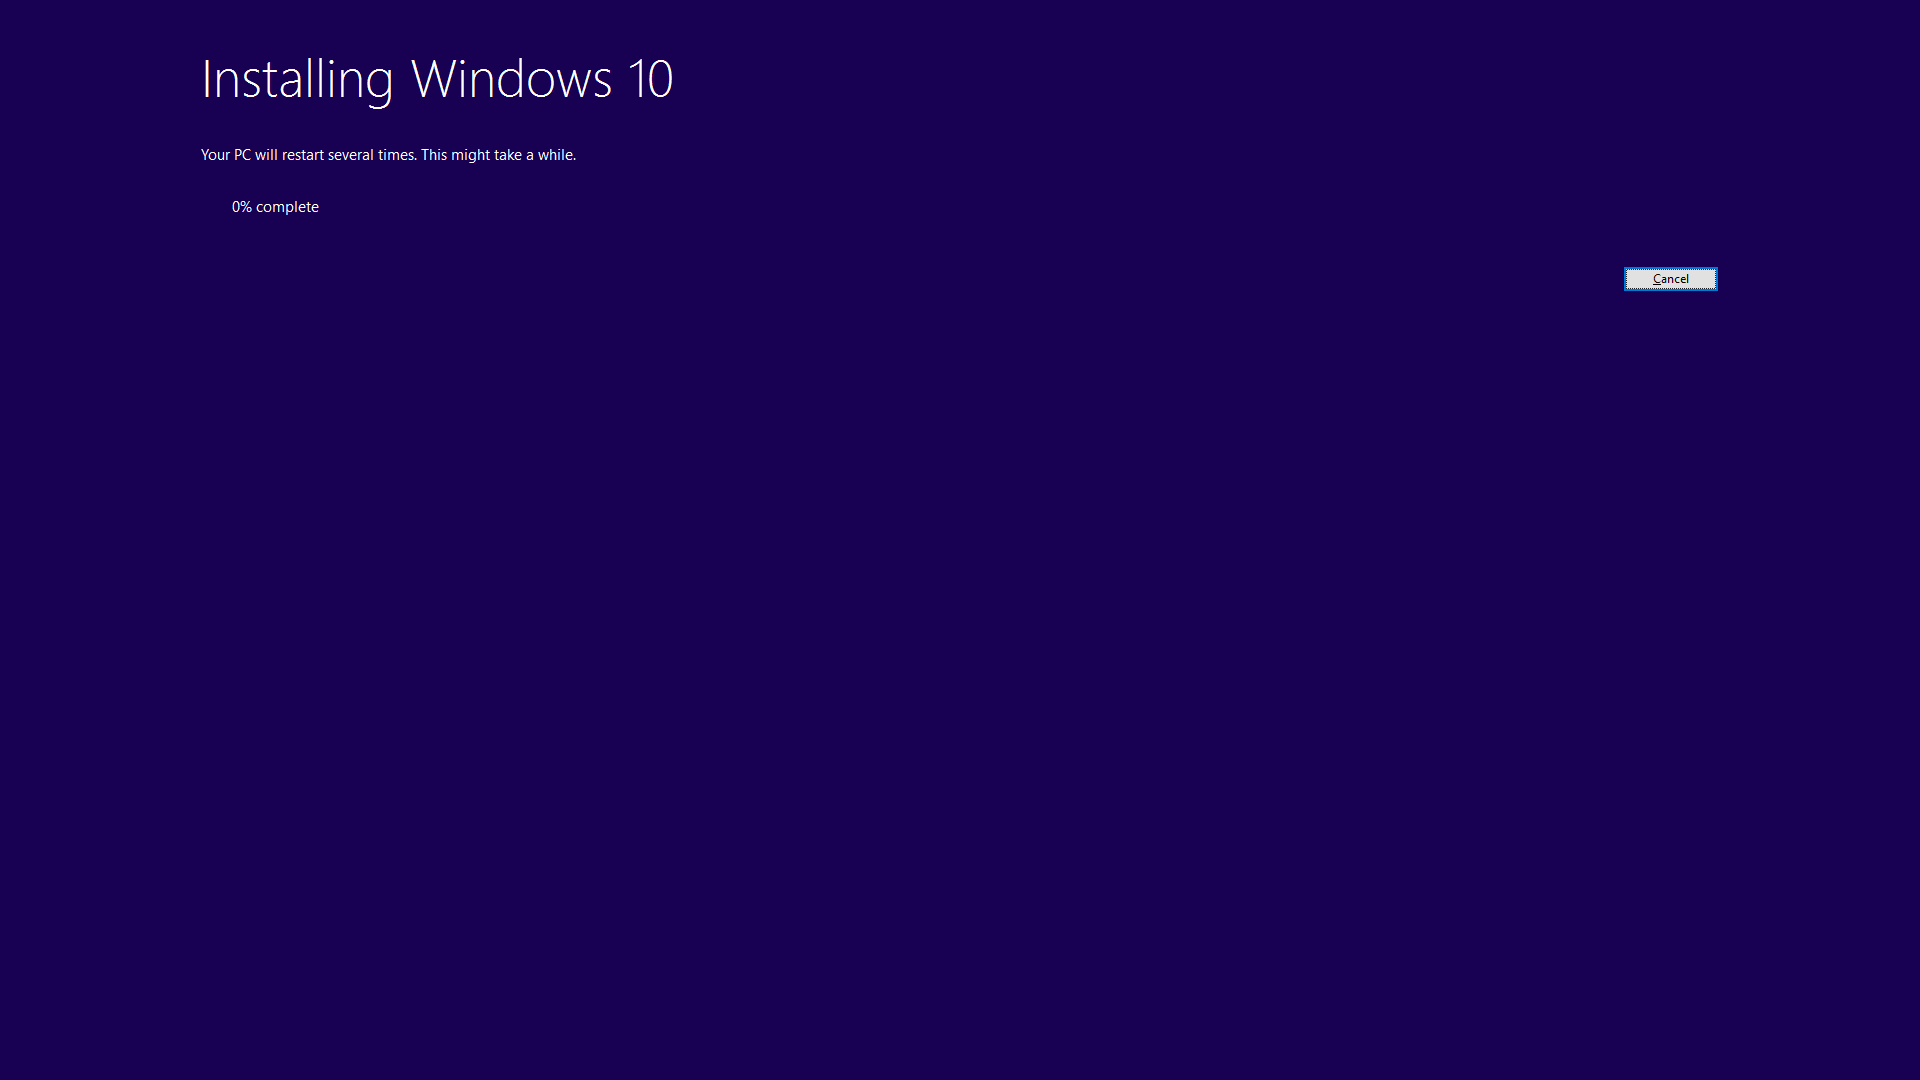 Upgradation to the latest OS WINDOWS 10 version. 0bc2a0ff-7d90-41c5-8644-d68a52fc2881?upload=true.png